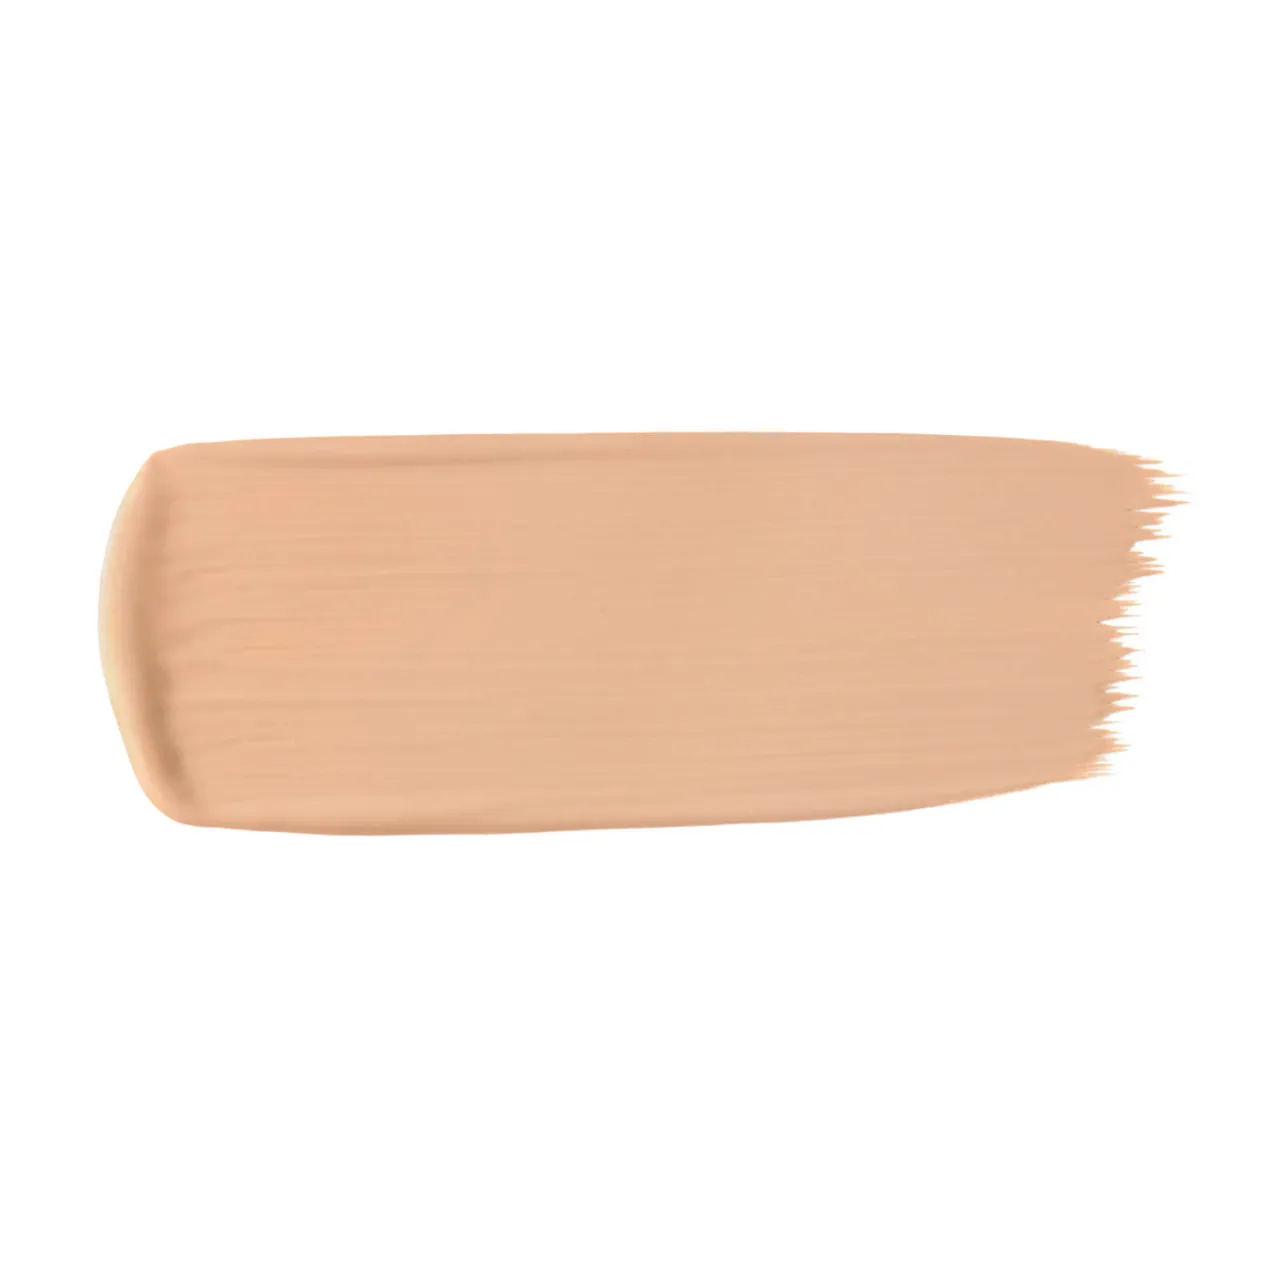 NARS Soft Matte Complete Foundation 45ml (Various Shades) - Fiji